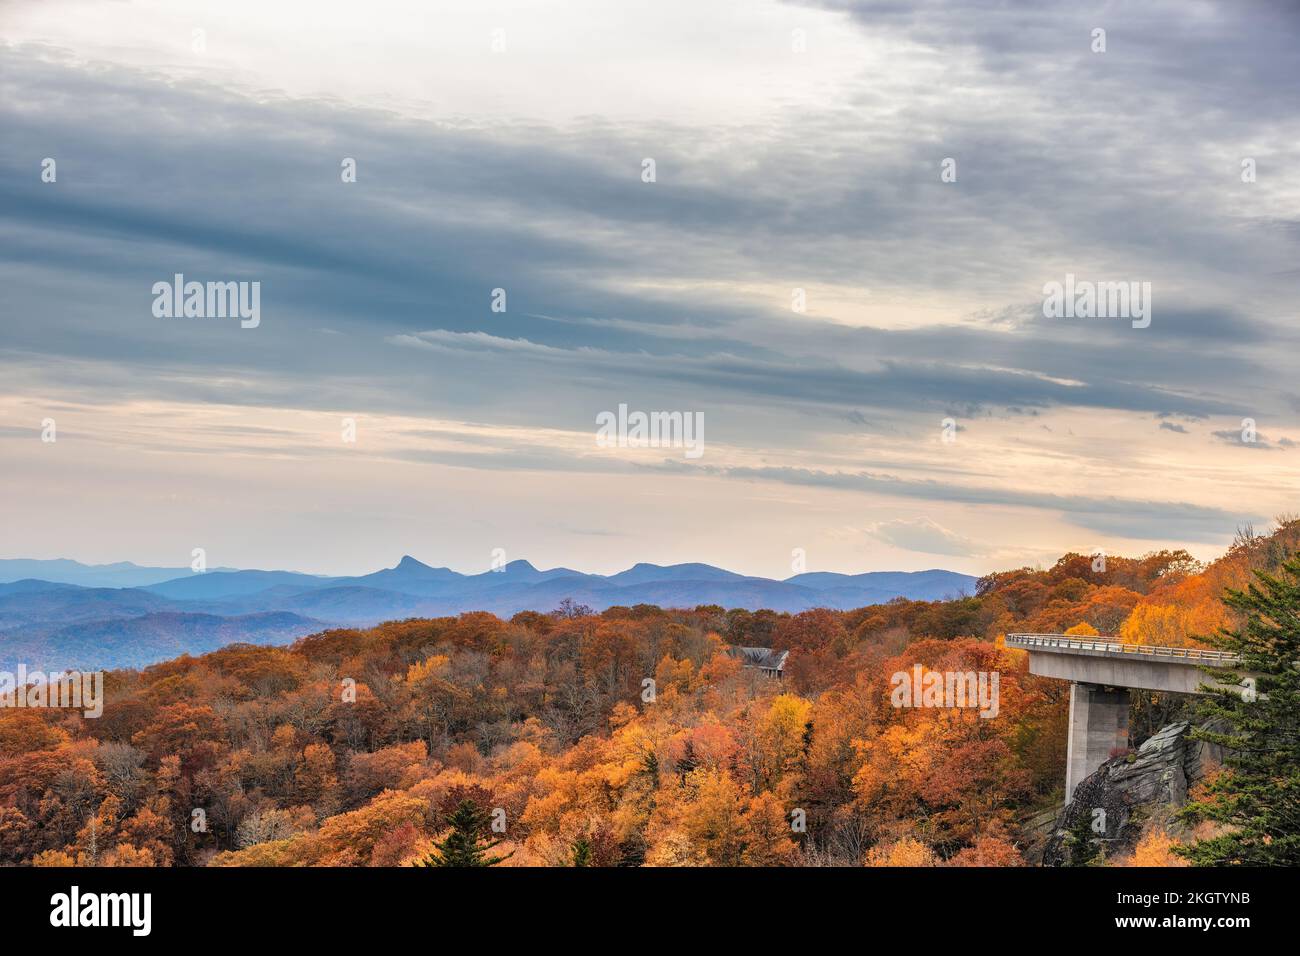 Views of the Linn Cove Viaduct under cloudy skies on the Blue Ridge Parkway in North Carolina Stock Photo